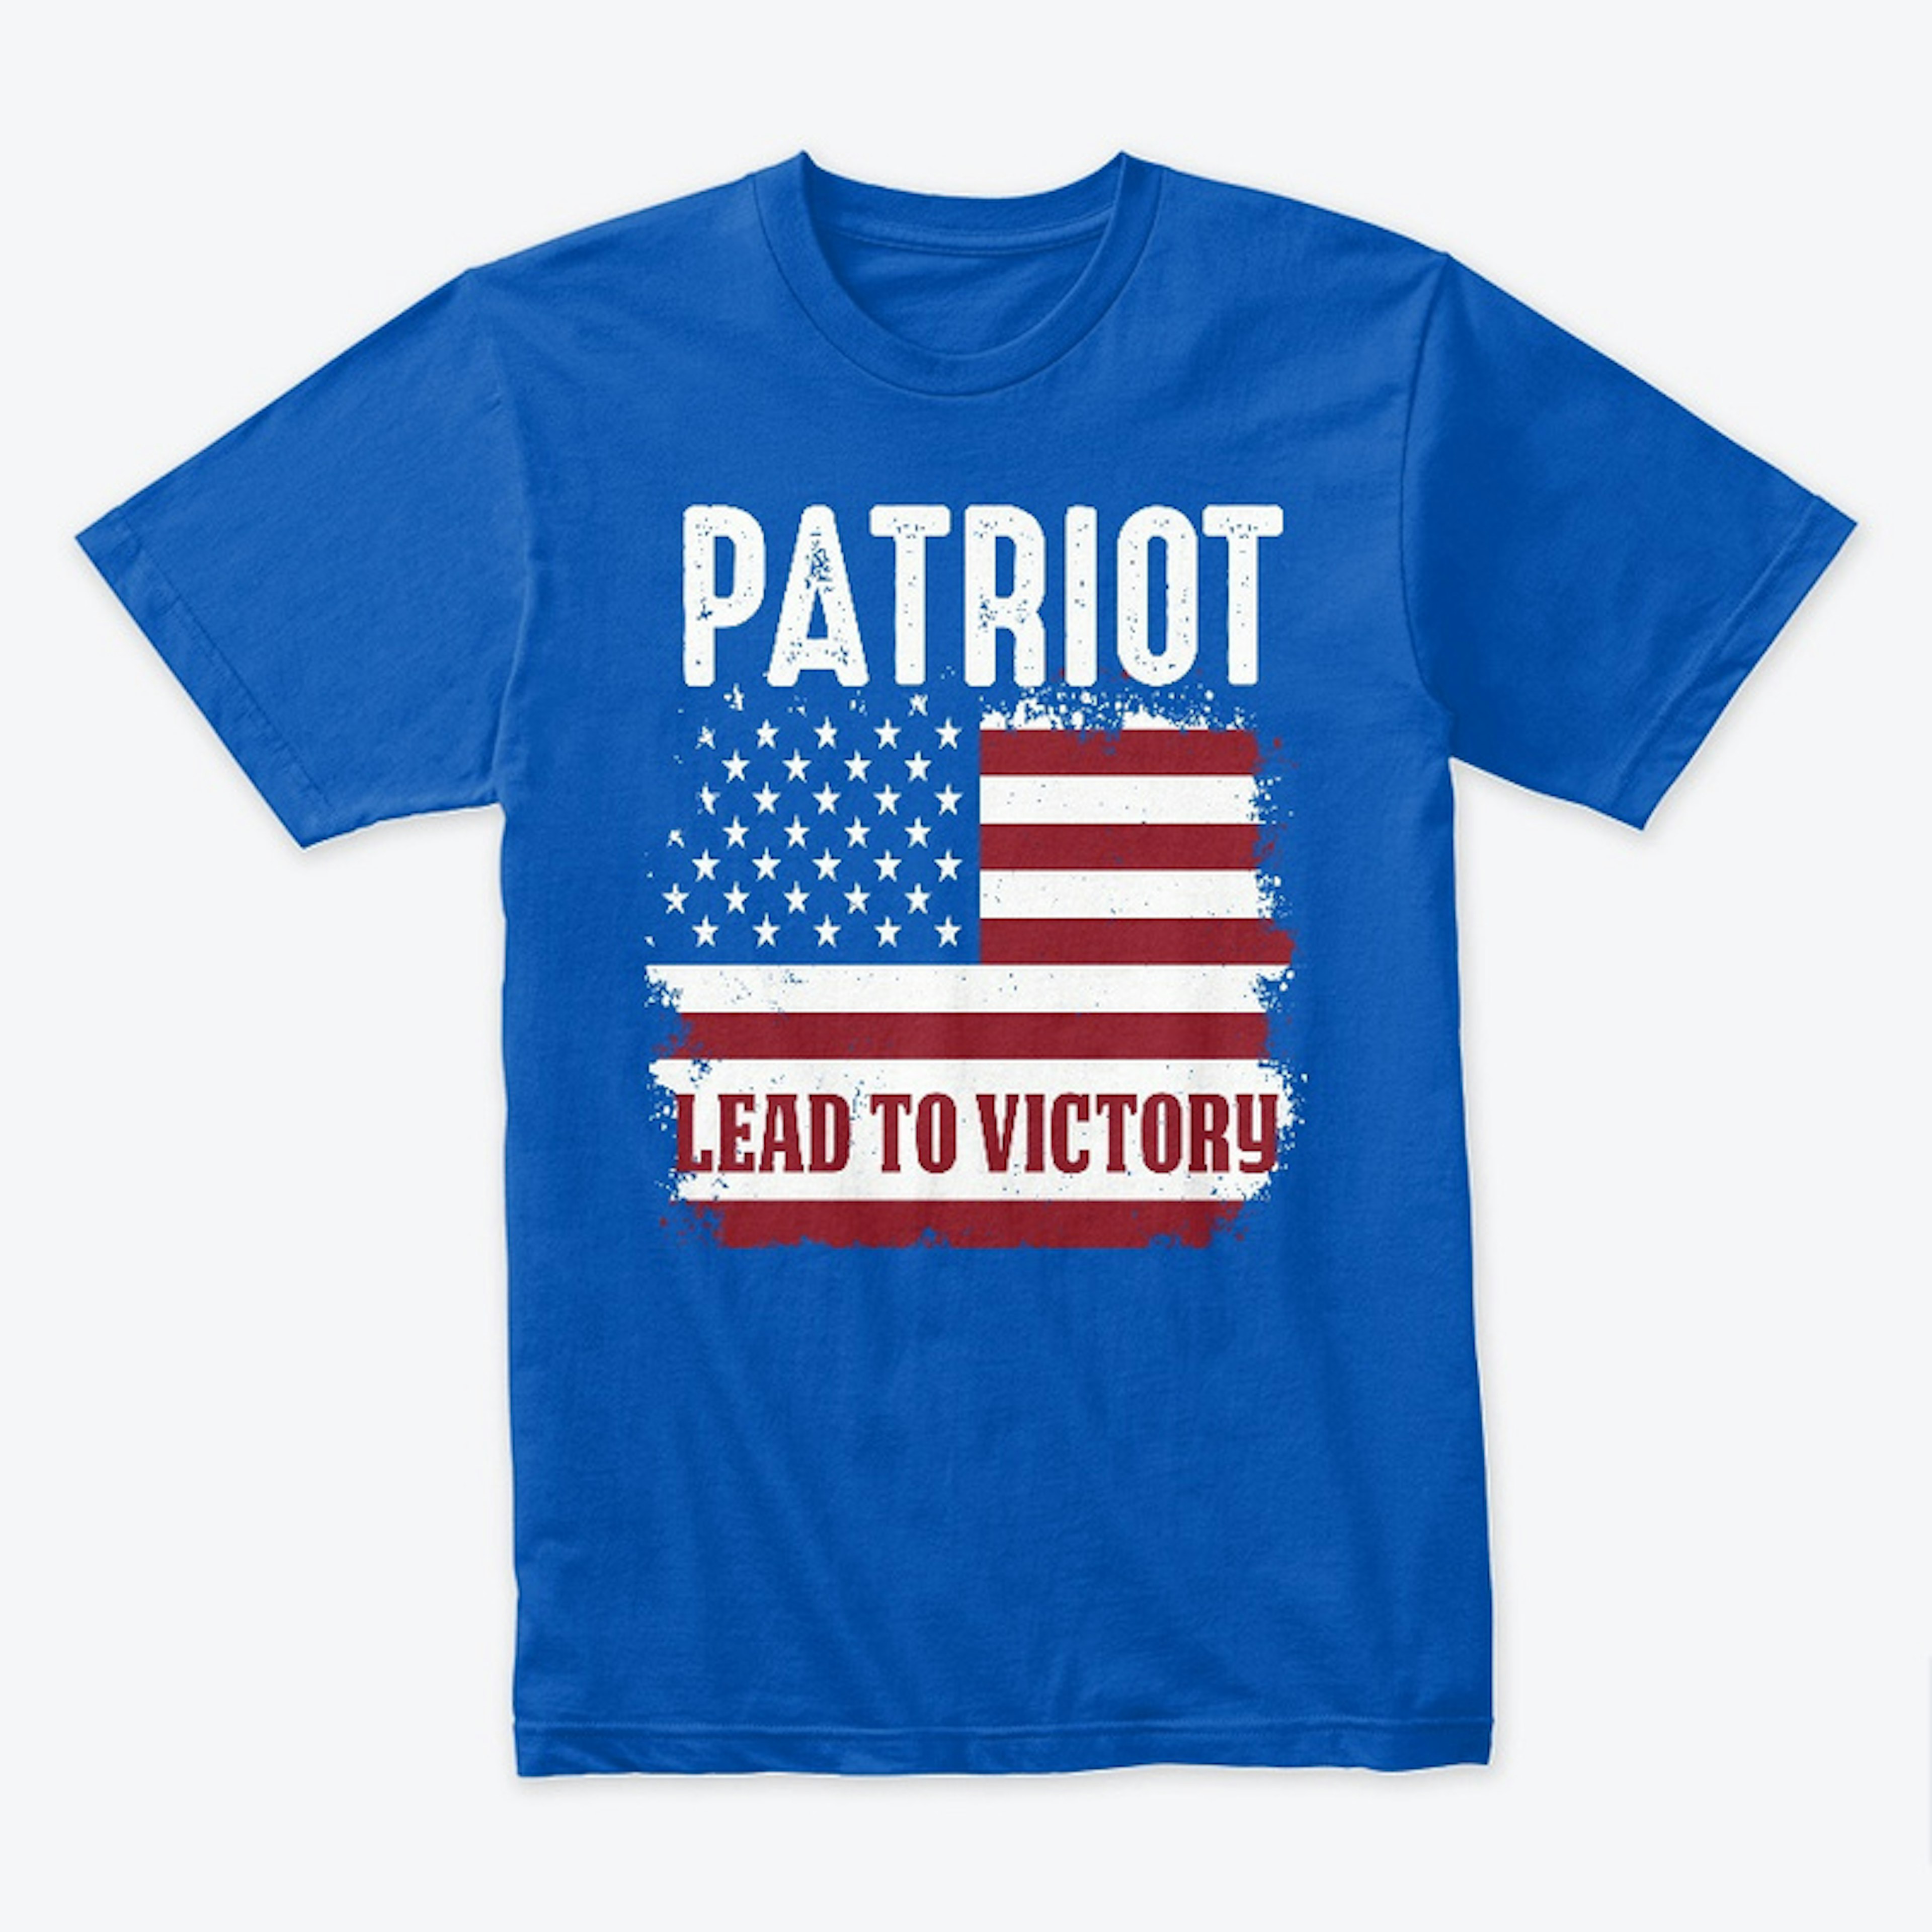 PATRIOT Lead to Victory BLUE